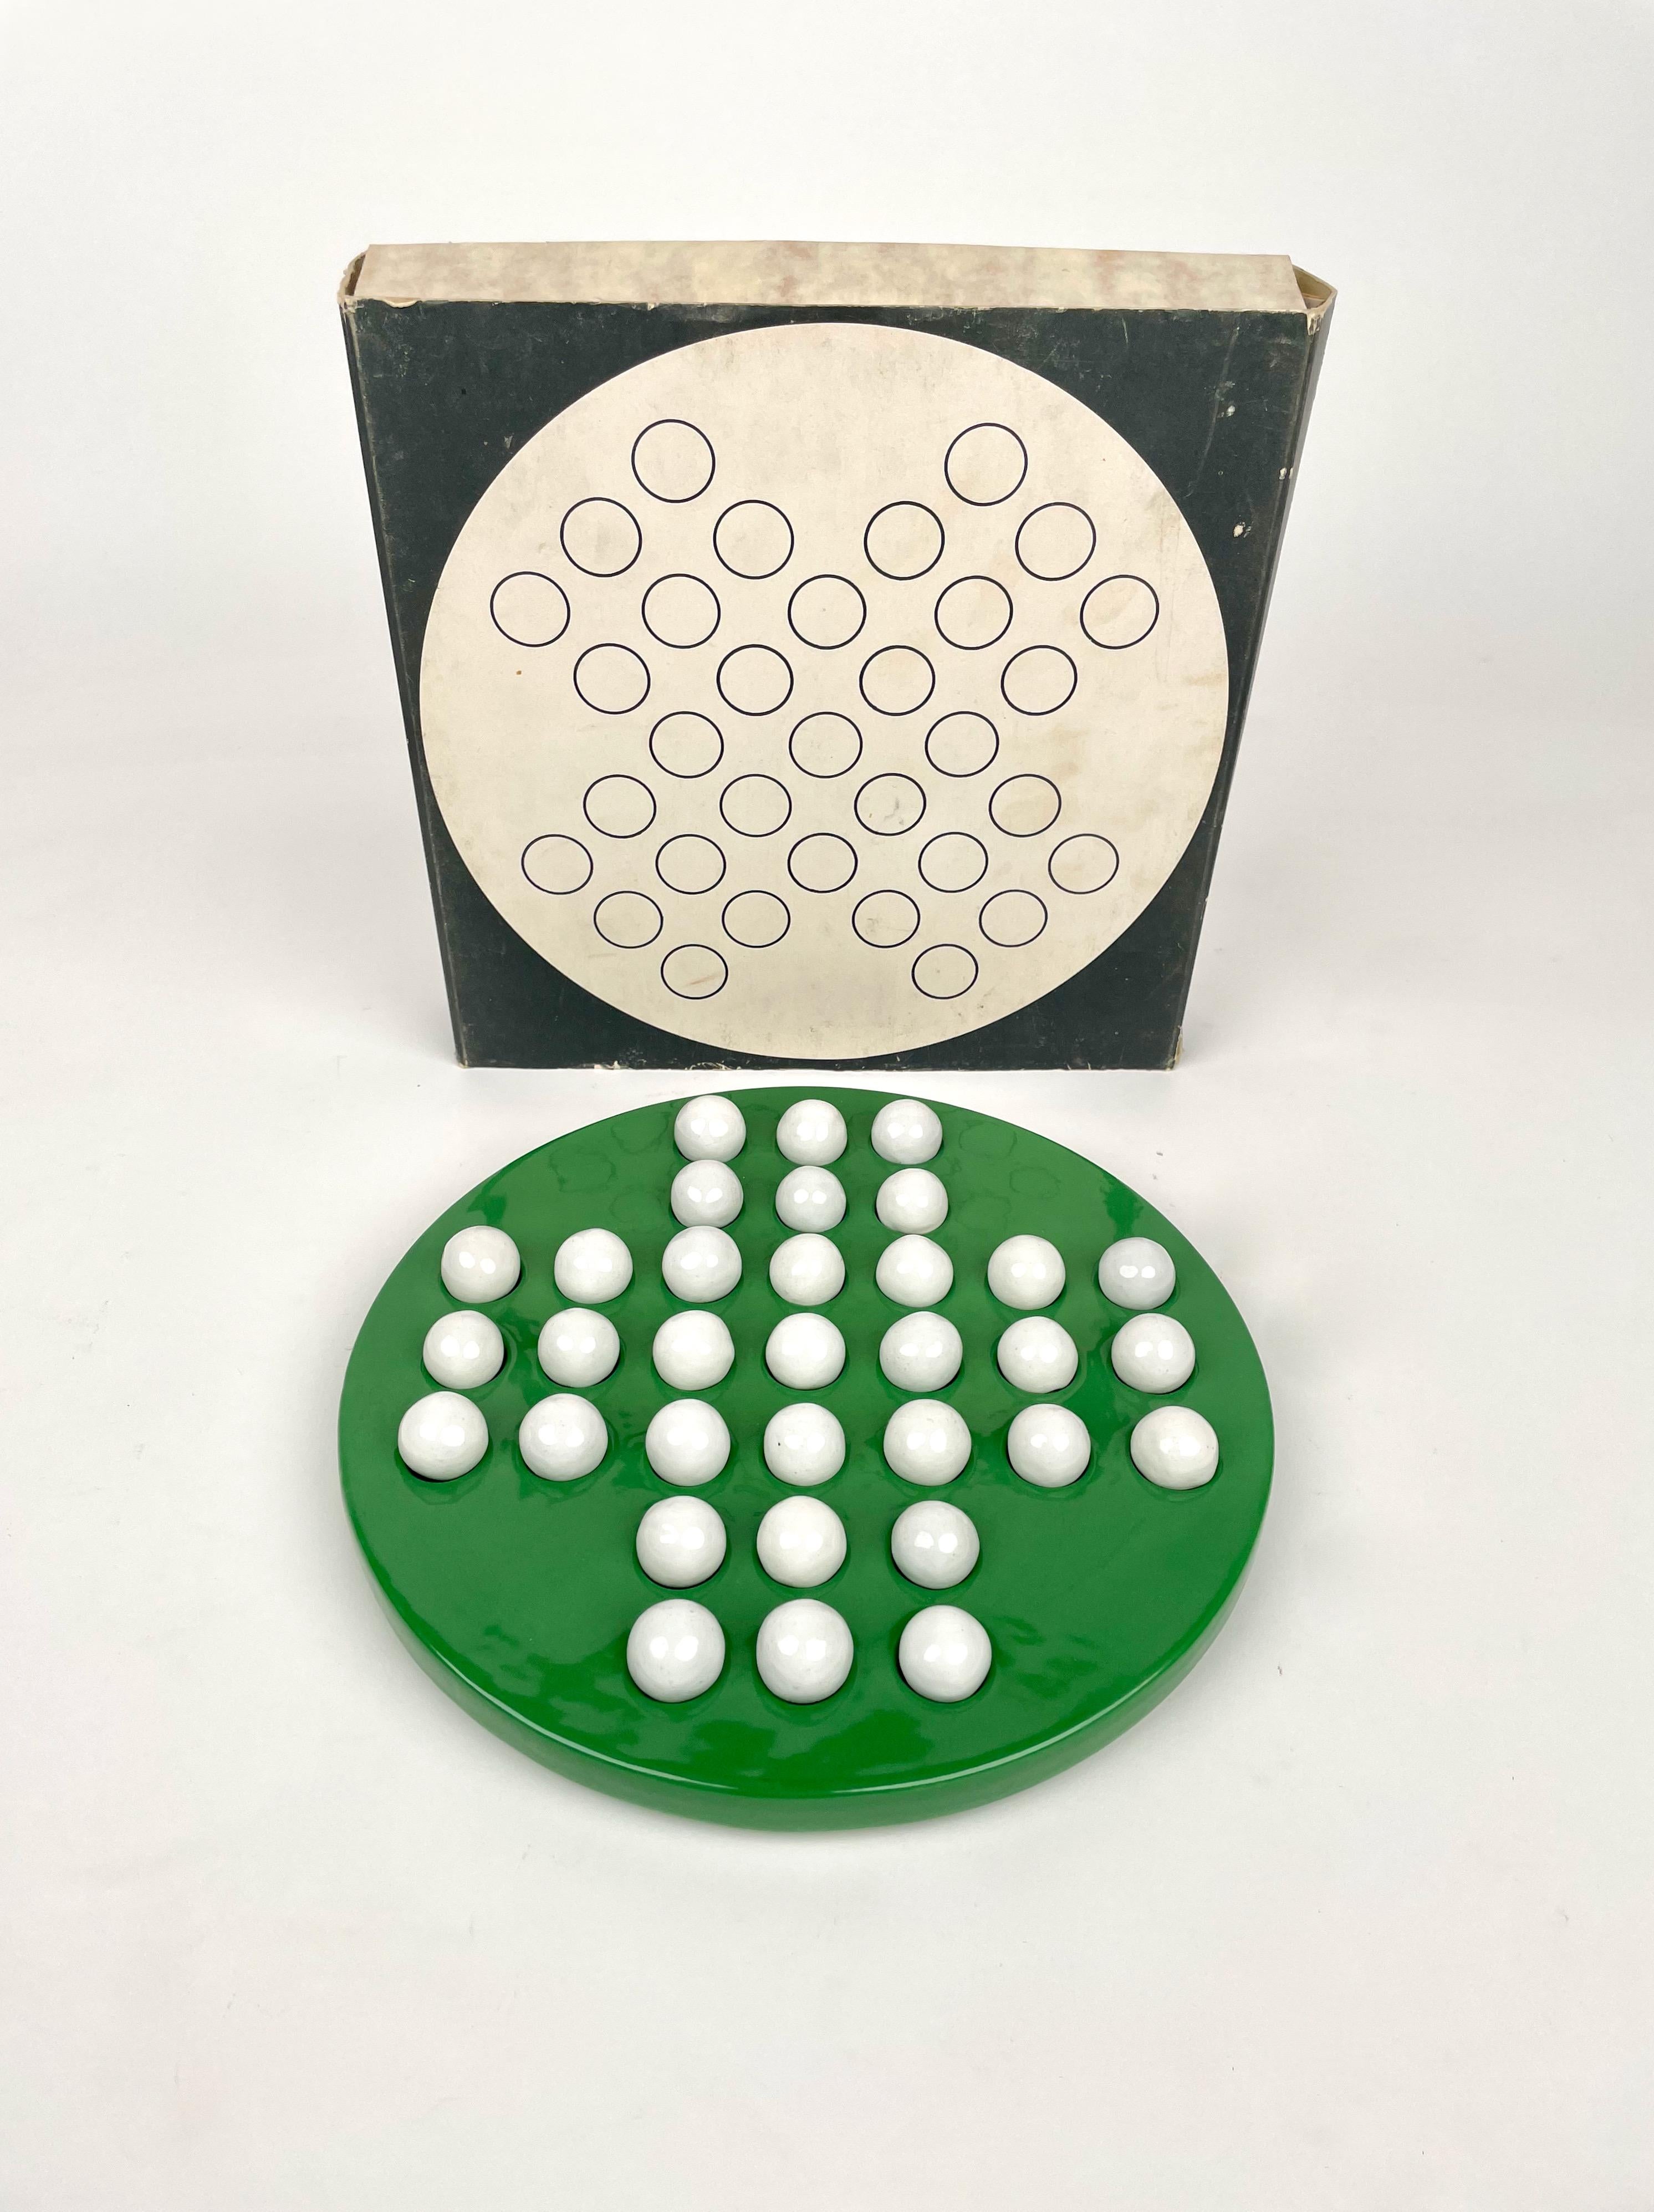 Checkers Game by Ennio Lucini for Gabbianelli Green & White Ceramic, Italy 1970s For Sale 1